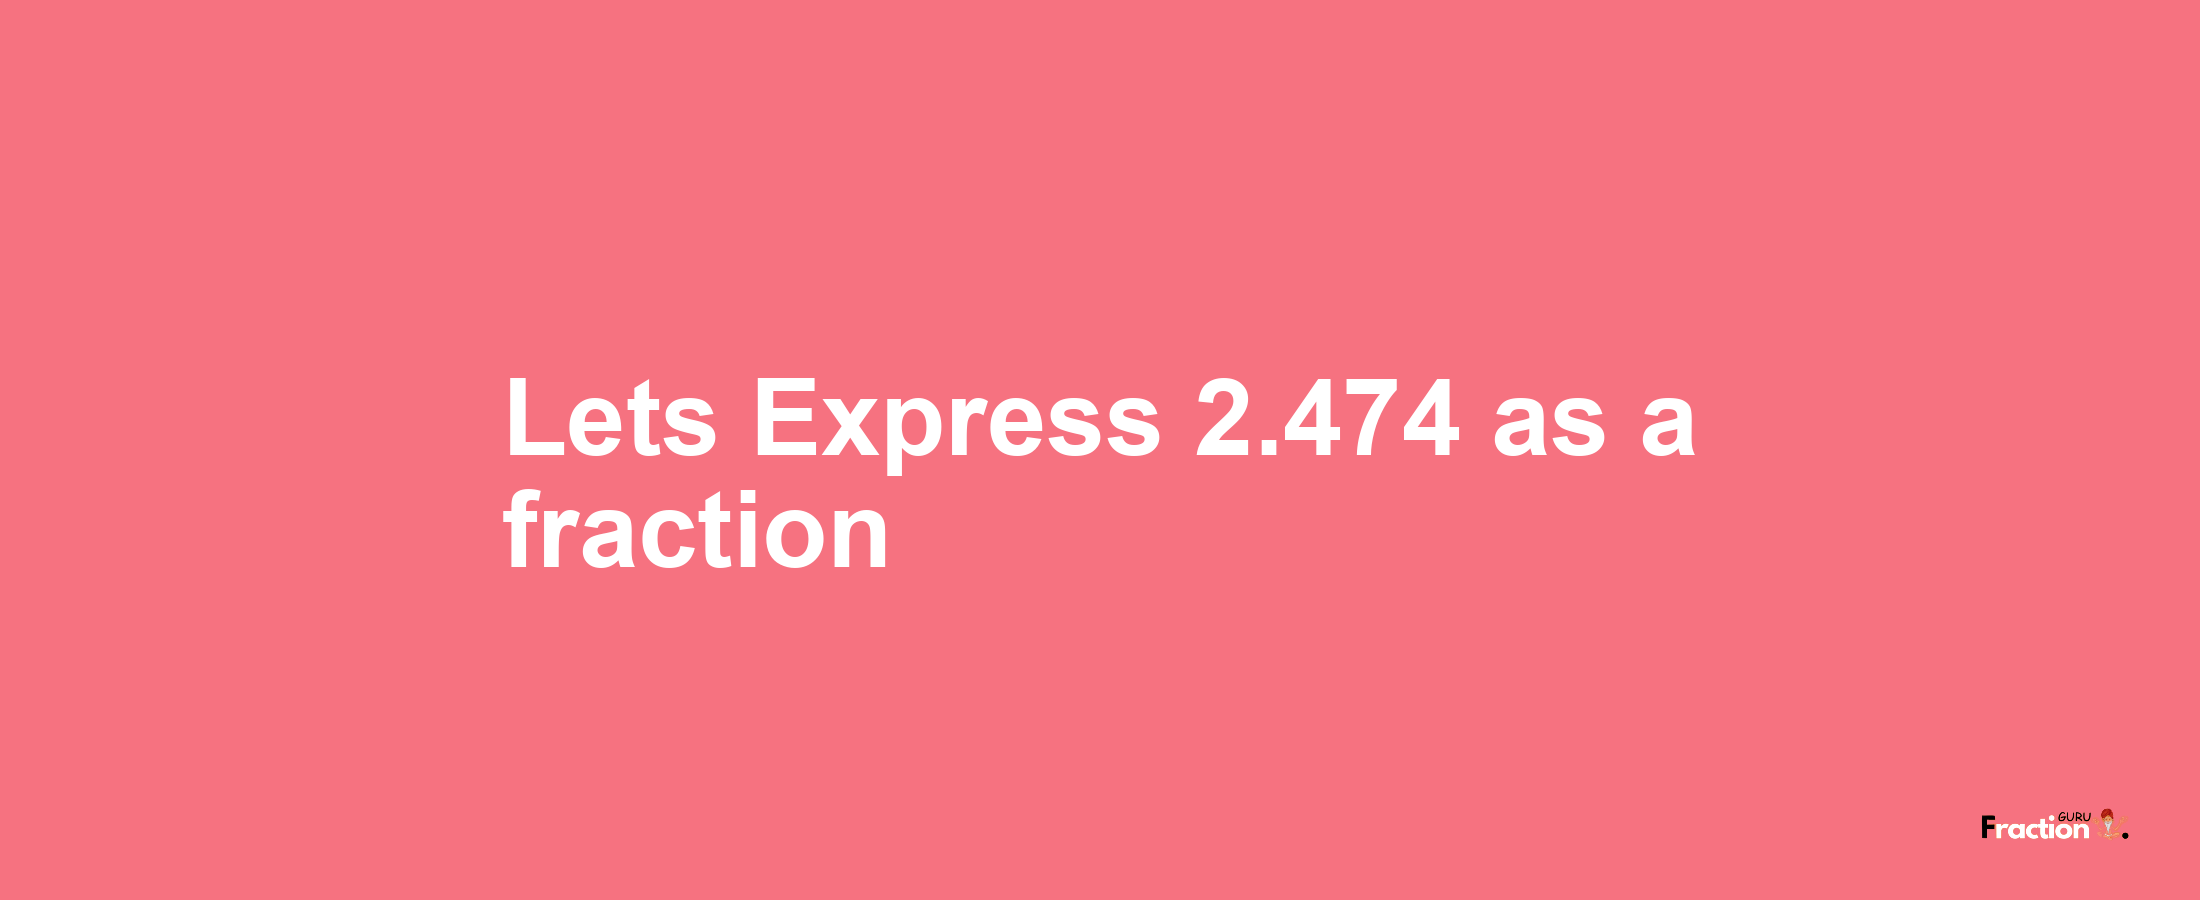 Lets Express 2.474 as afraction